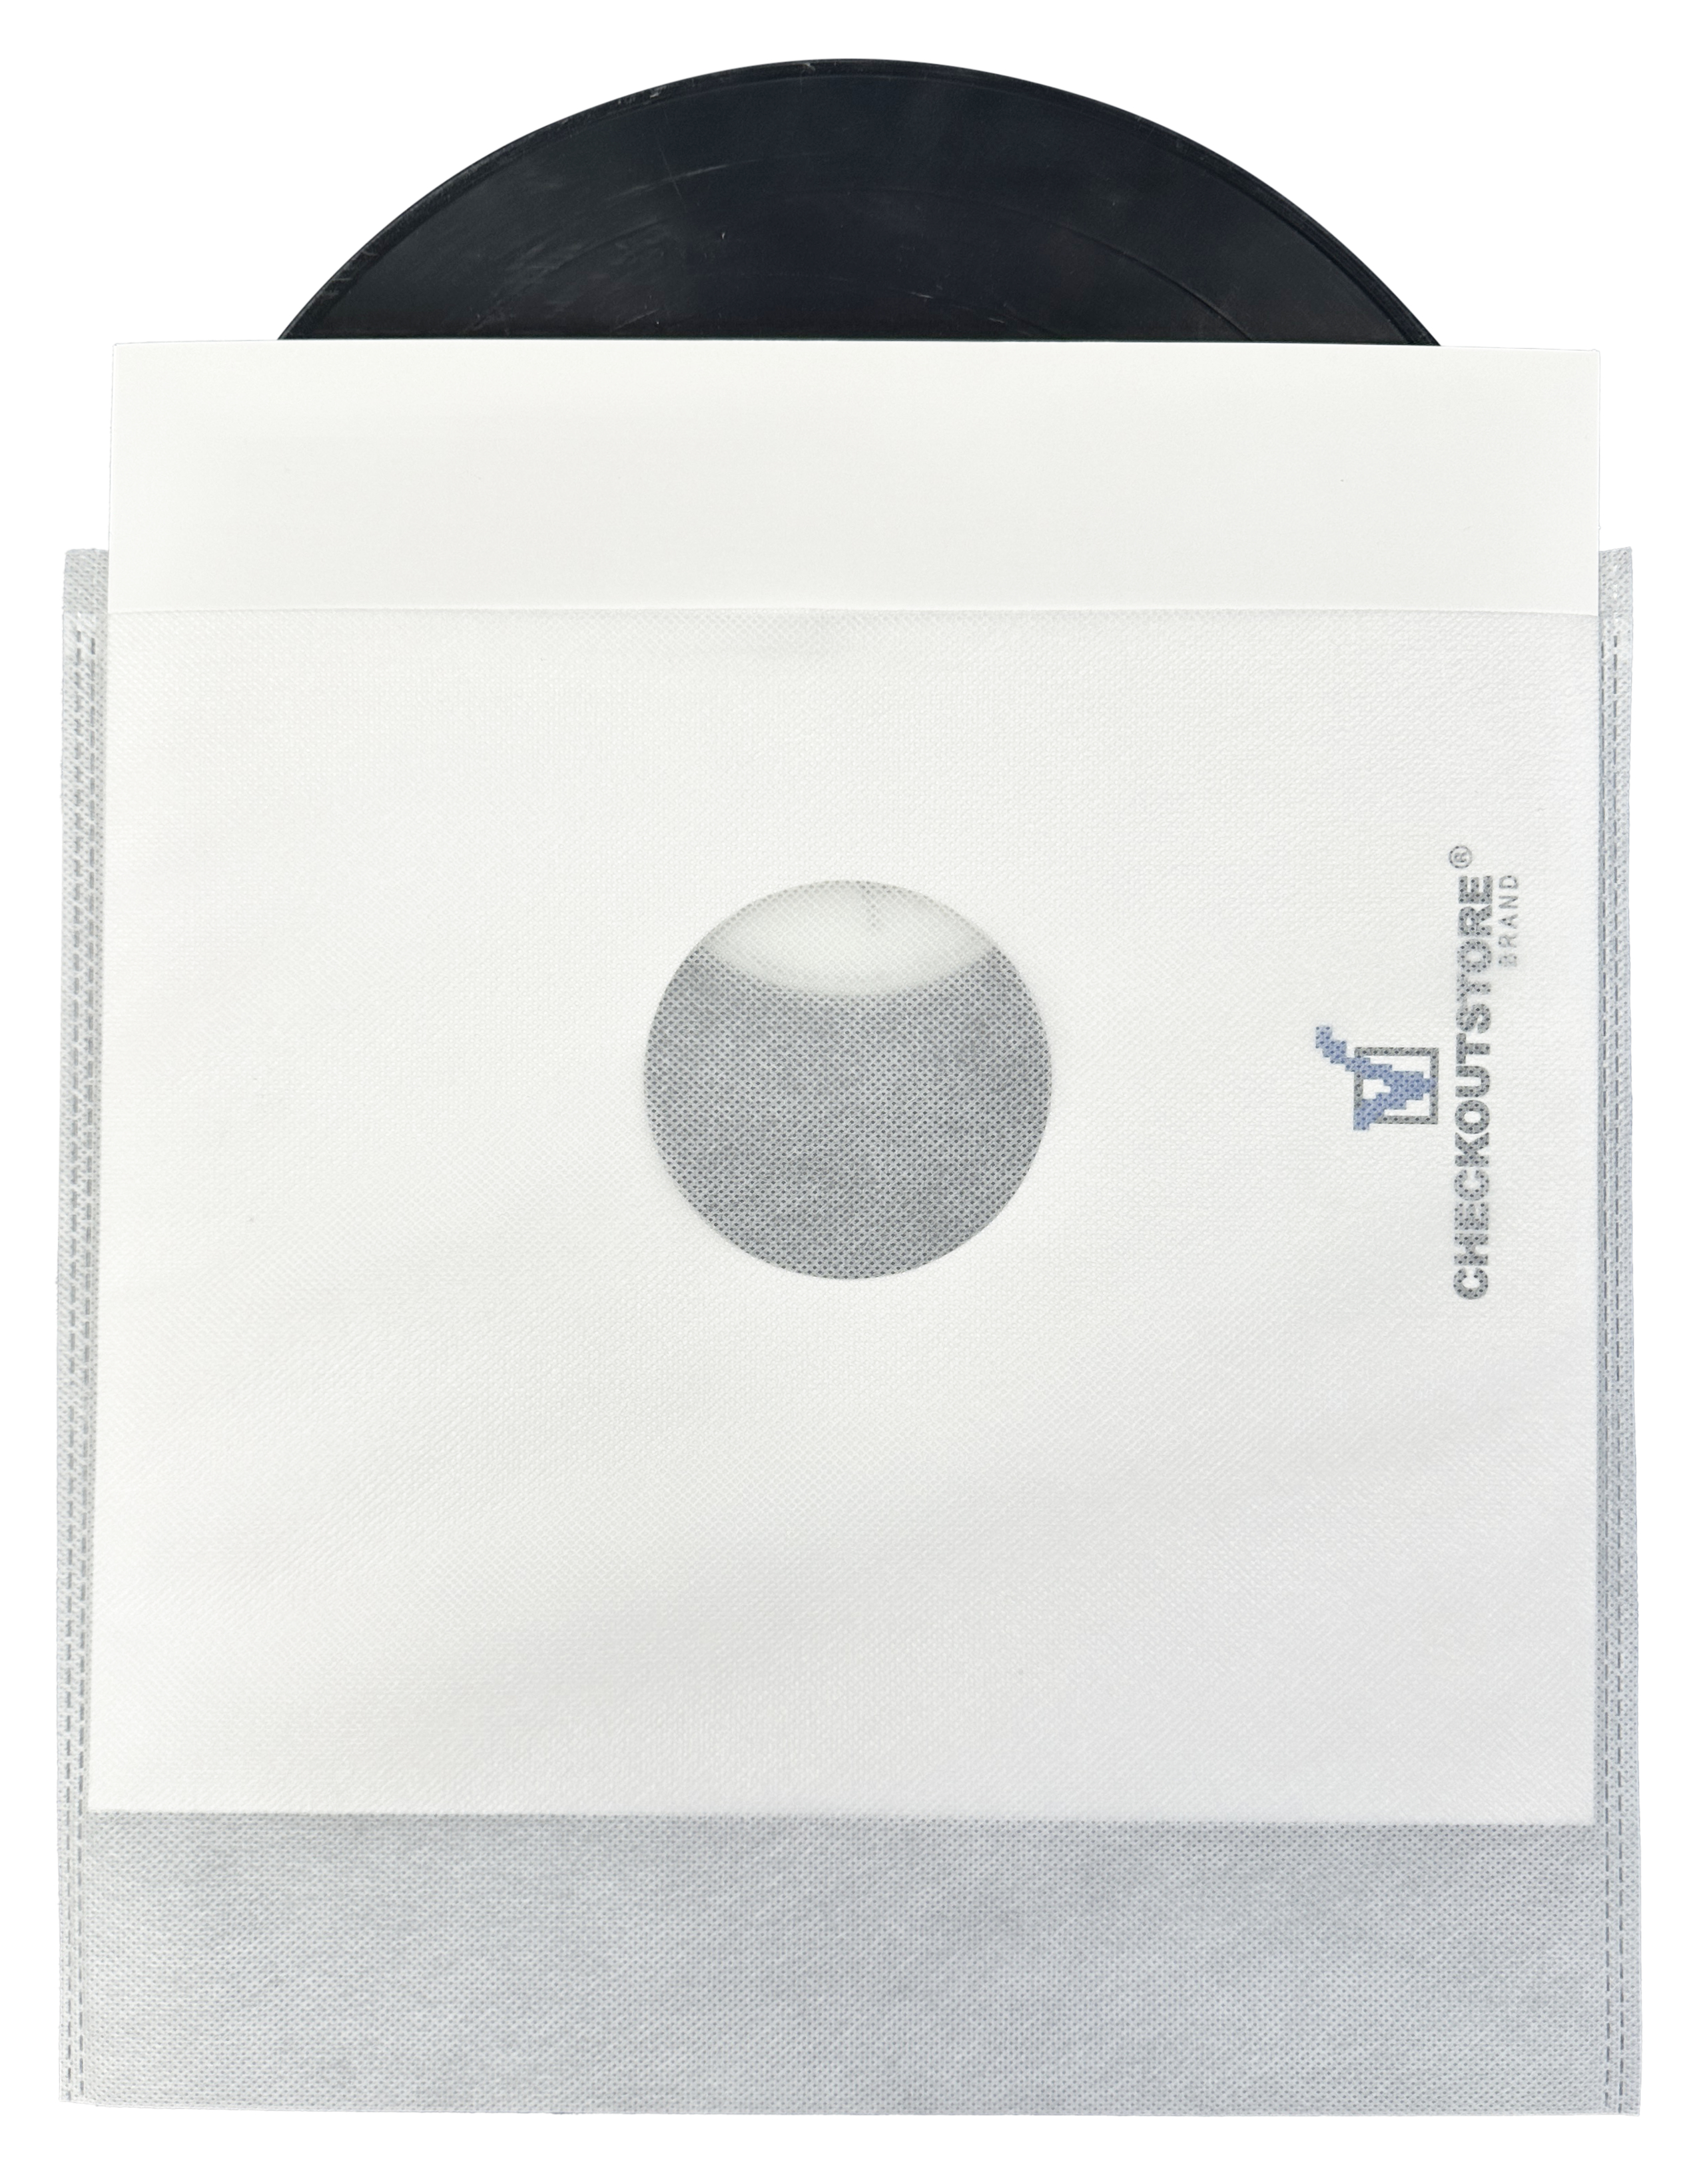 Image of ID 1214260869 1000 CheckOutStore White Non Woven Record Outer Sleeves for 12" LP Vinyl 33 RPM Record Albums